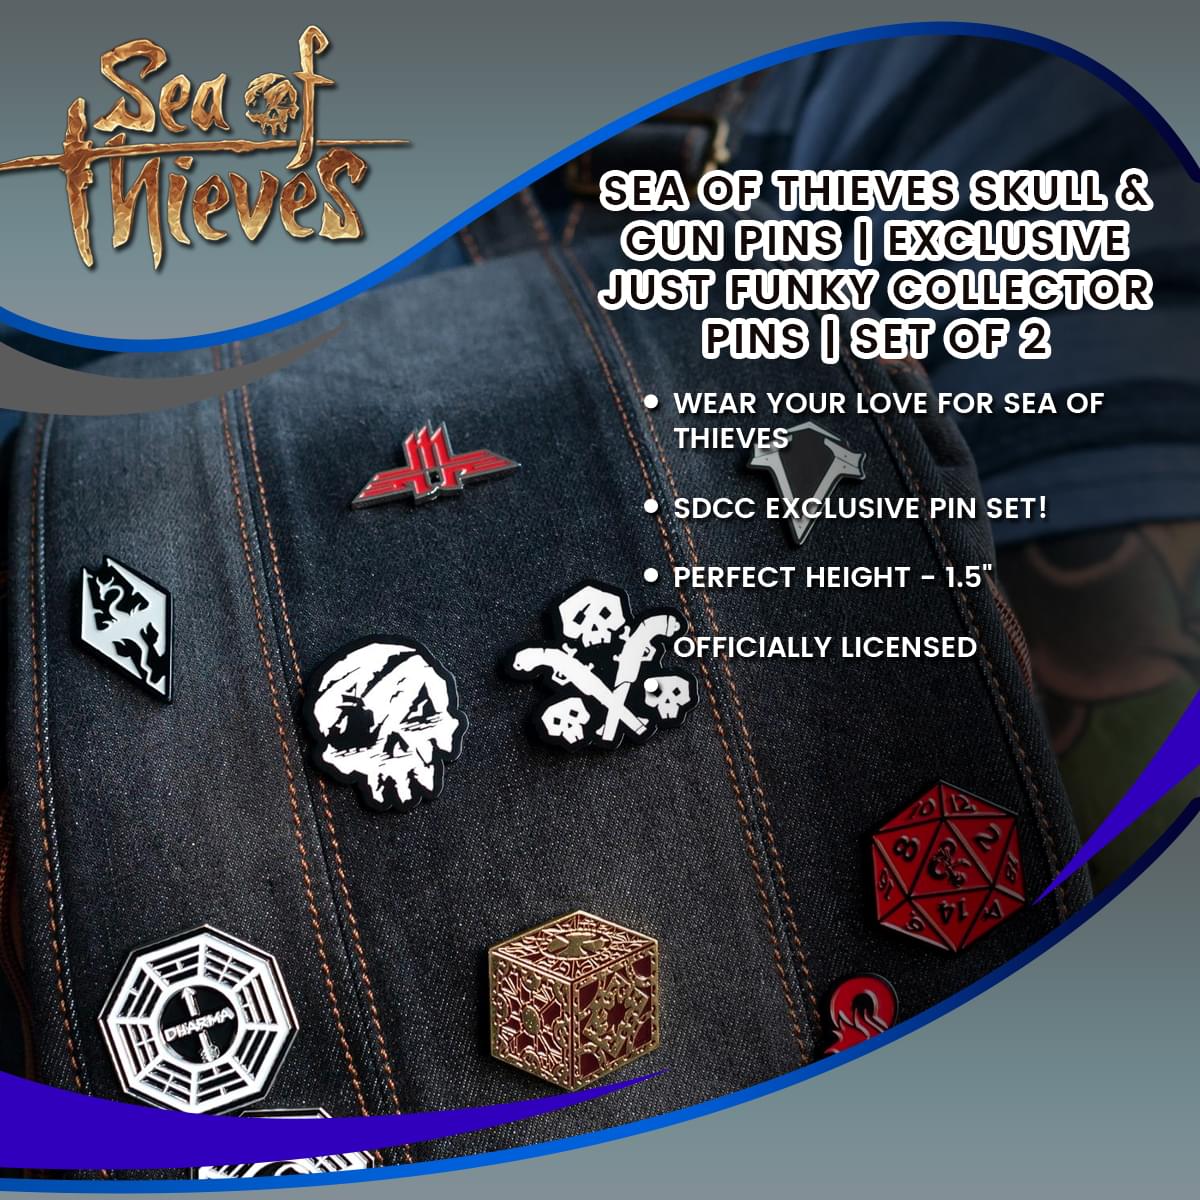 Sea of Thieves Skull & Gun Pins | Exclusive Just Funky Collector Pins | Set of 2